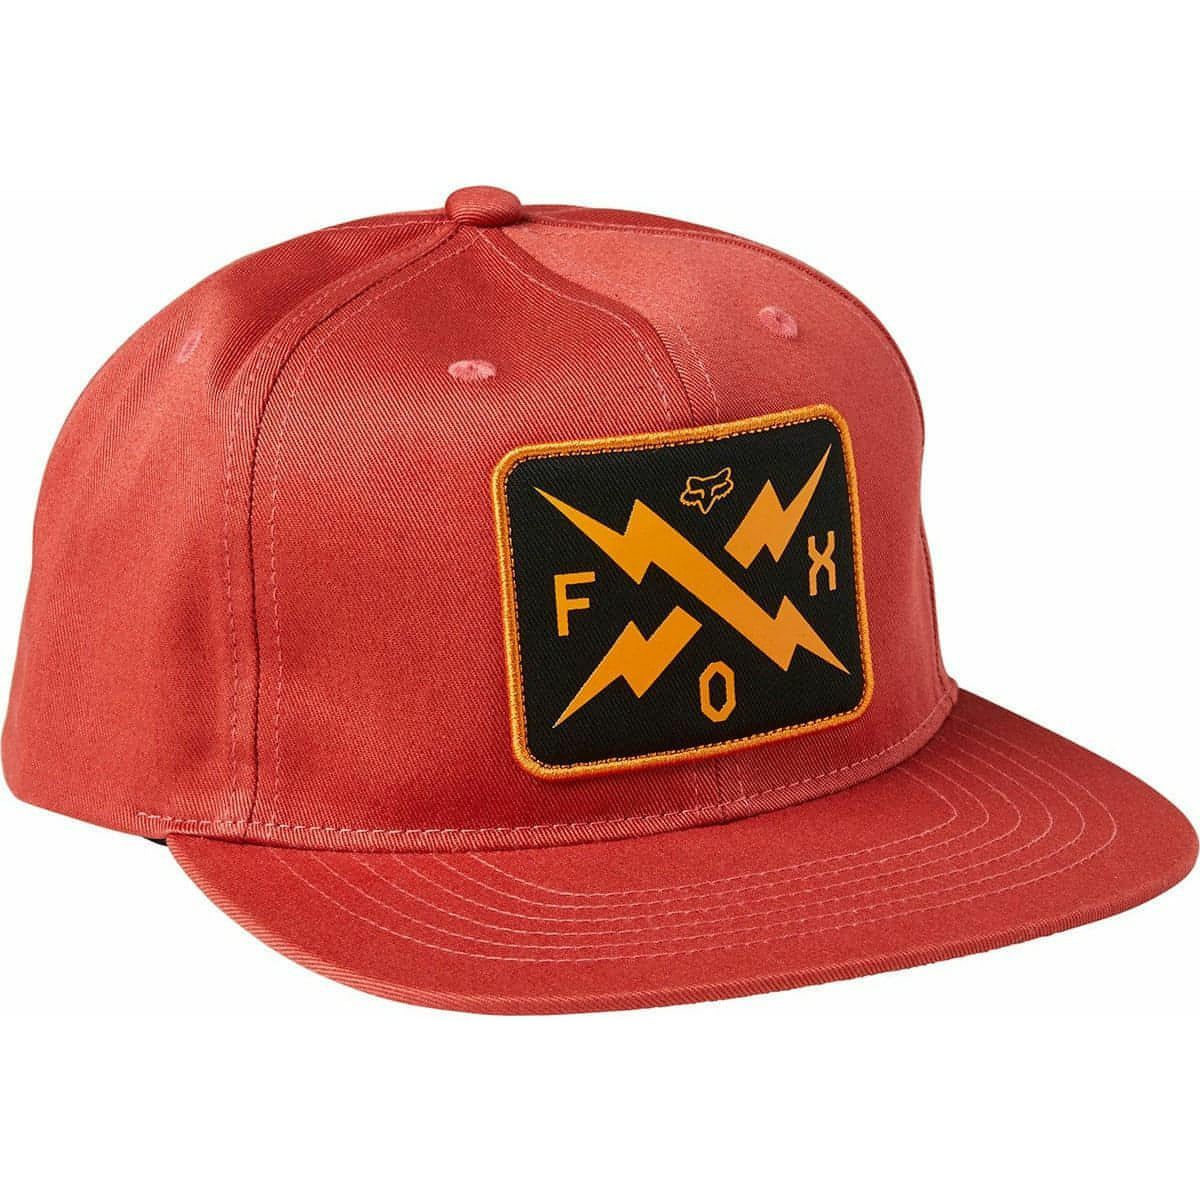 Fox Calibrated Snapback Cap - Red 191972652356 - Start Fitness